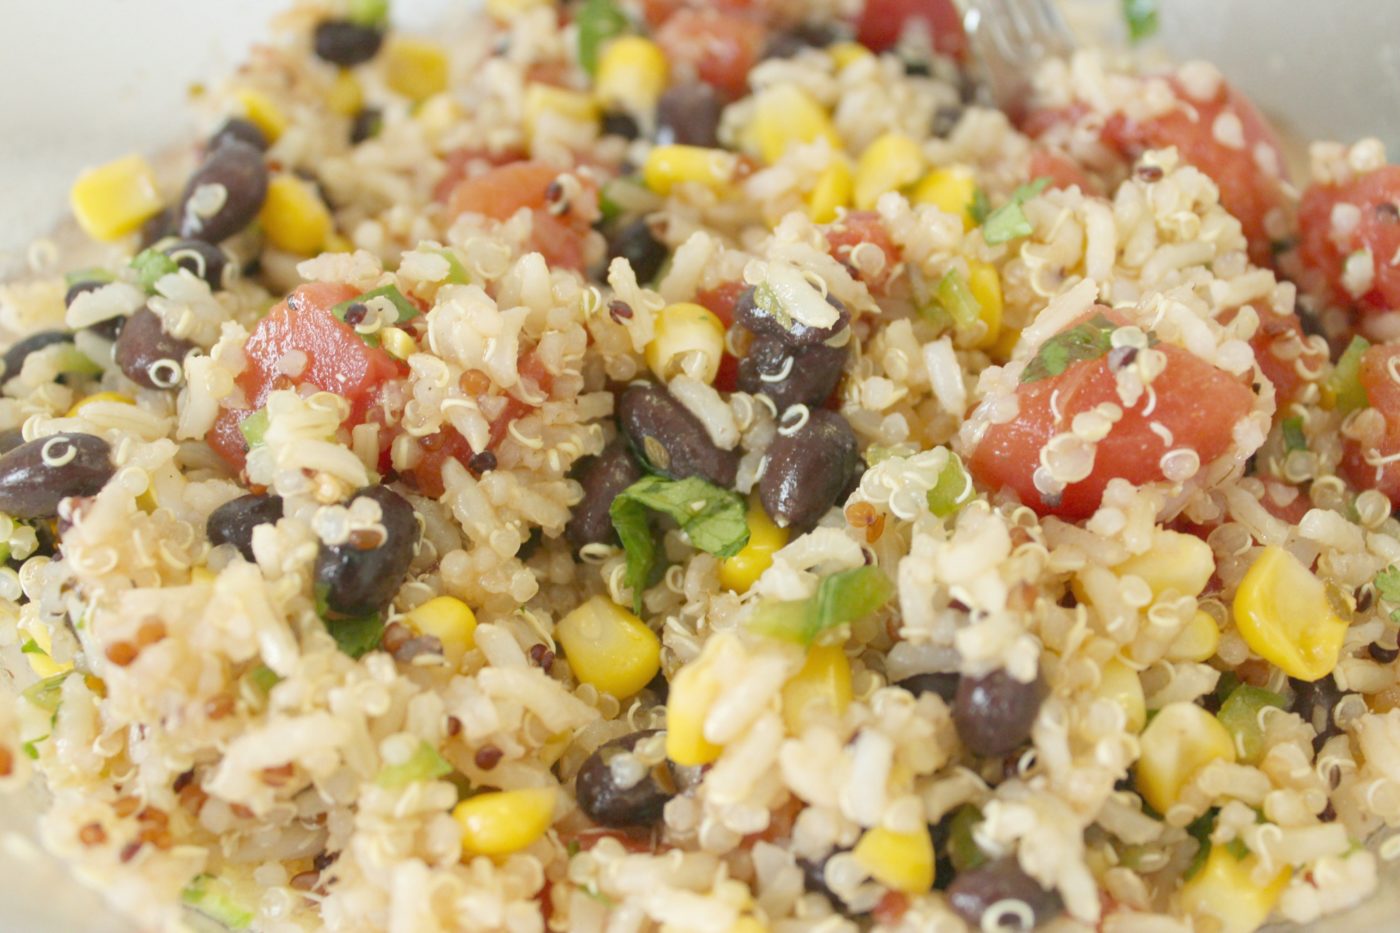 Southwestern quinoa salad is a flavorful and easy solution to weeknight dinner.